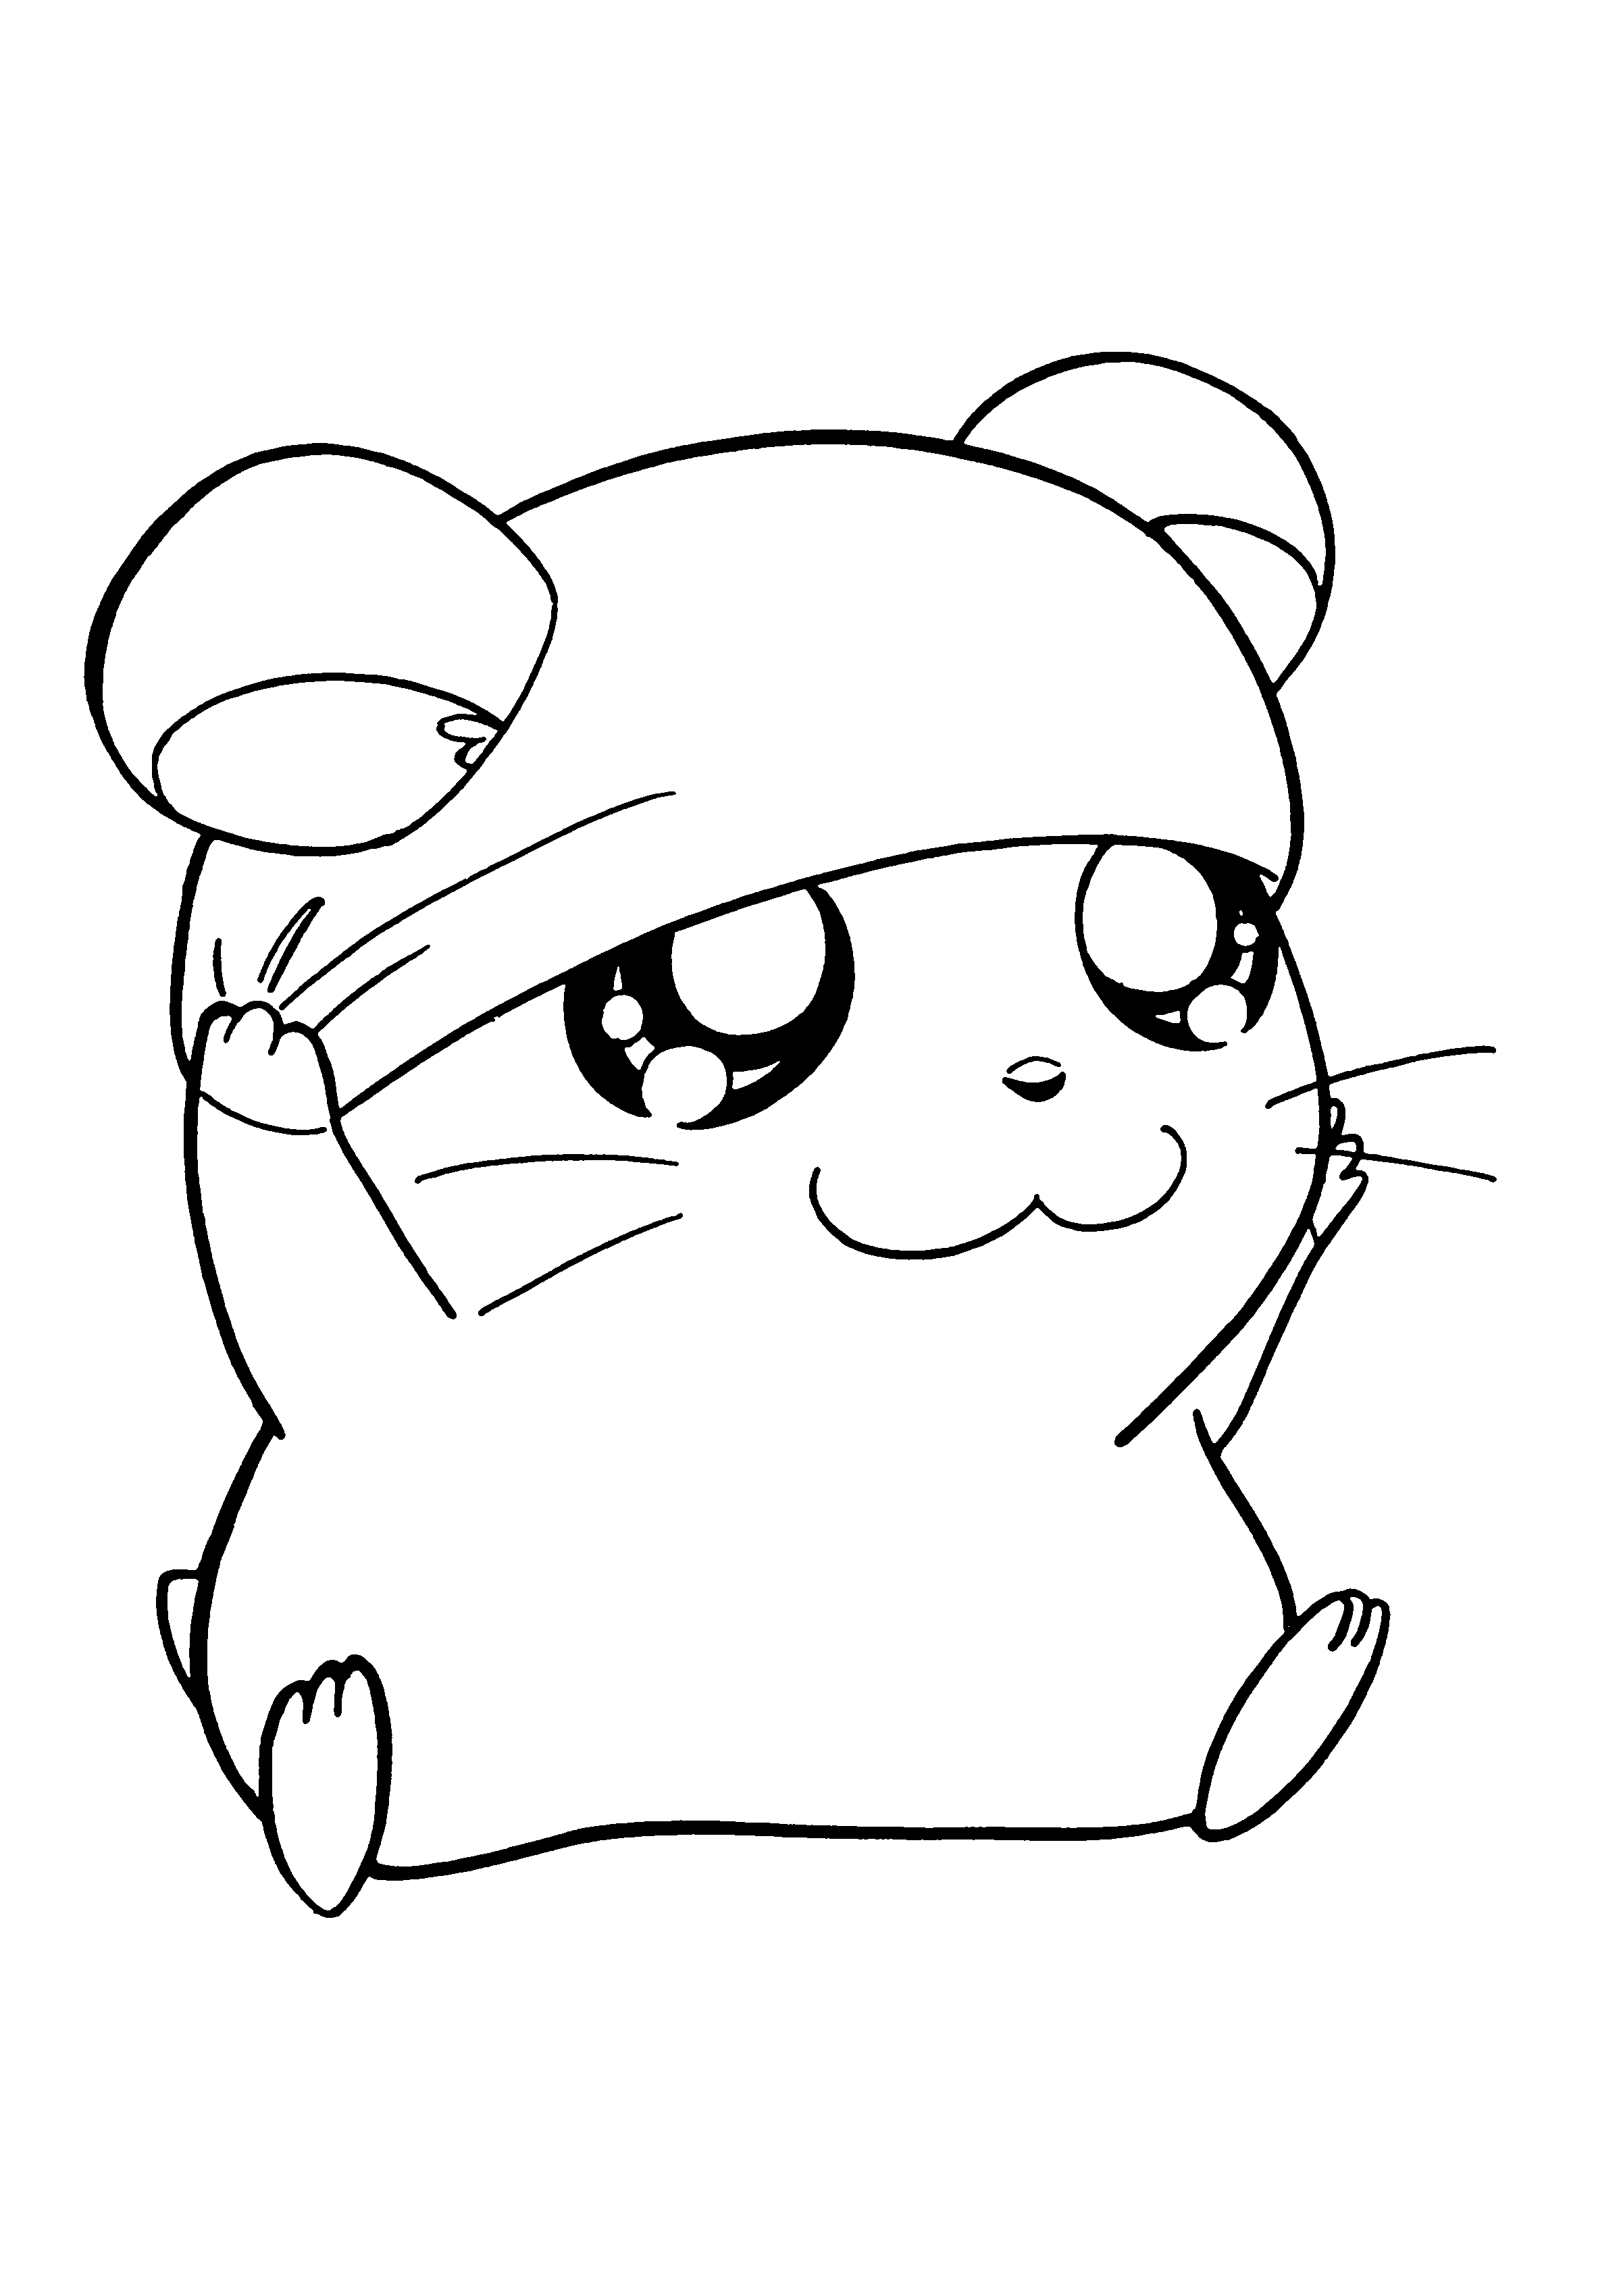 hamster coloring page hamster coloring pages to download and print for free page hamster coloring 